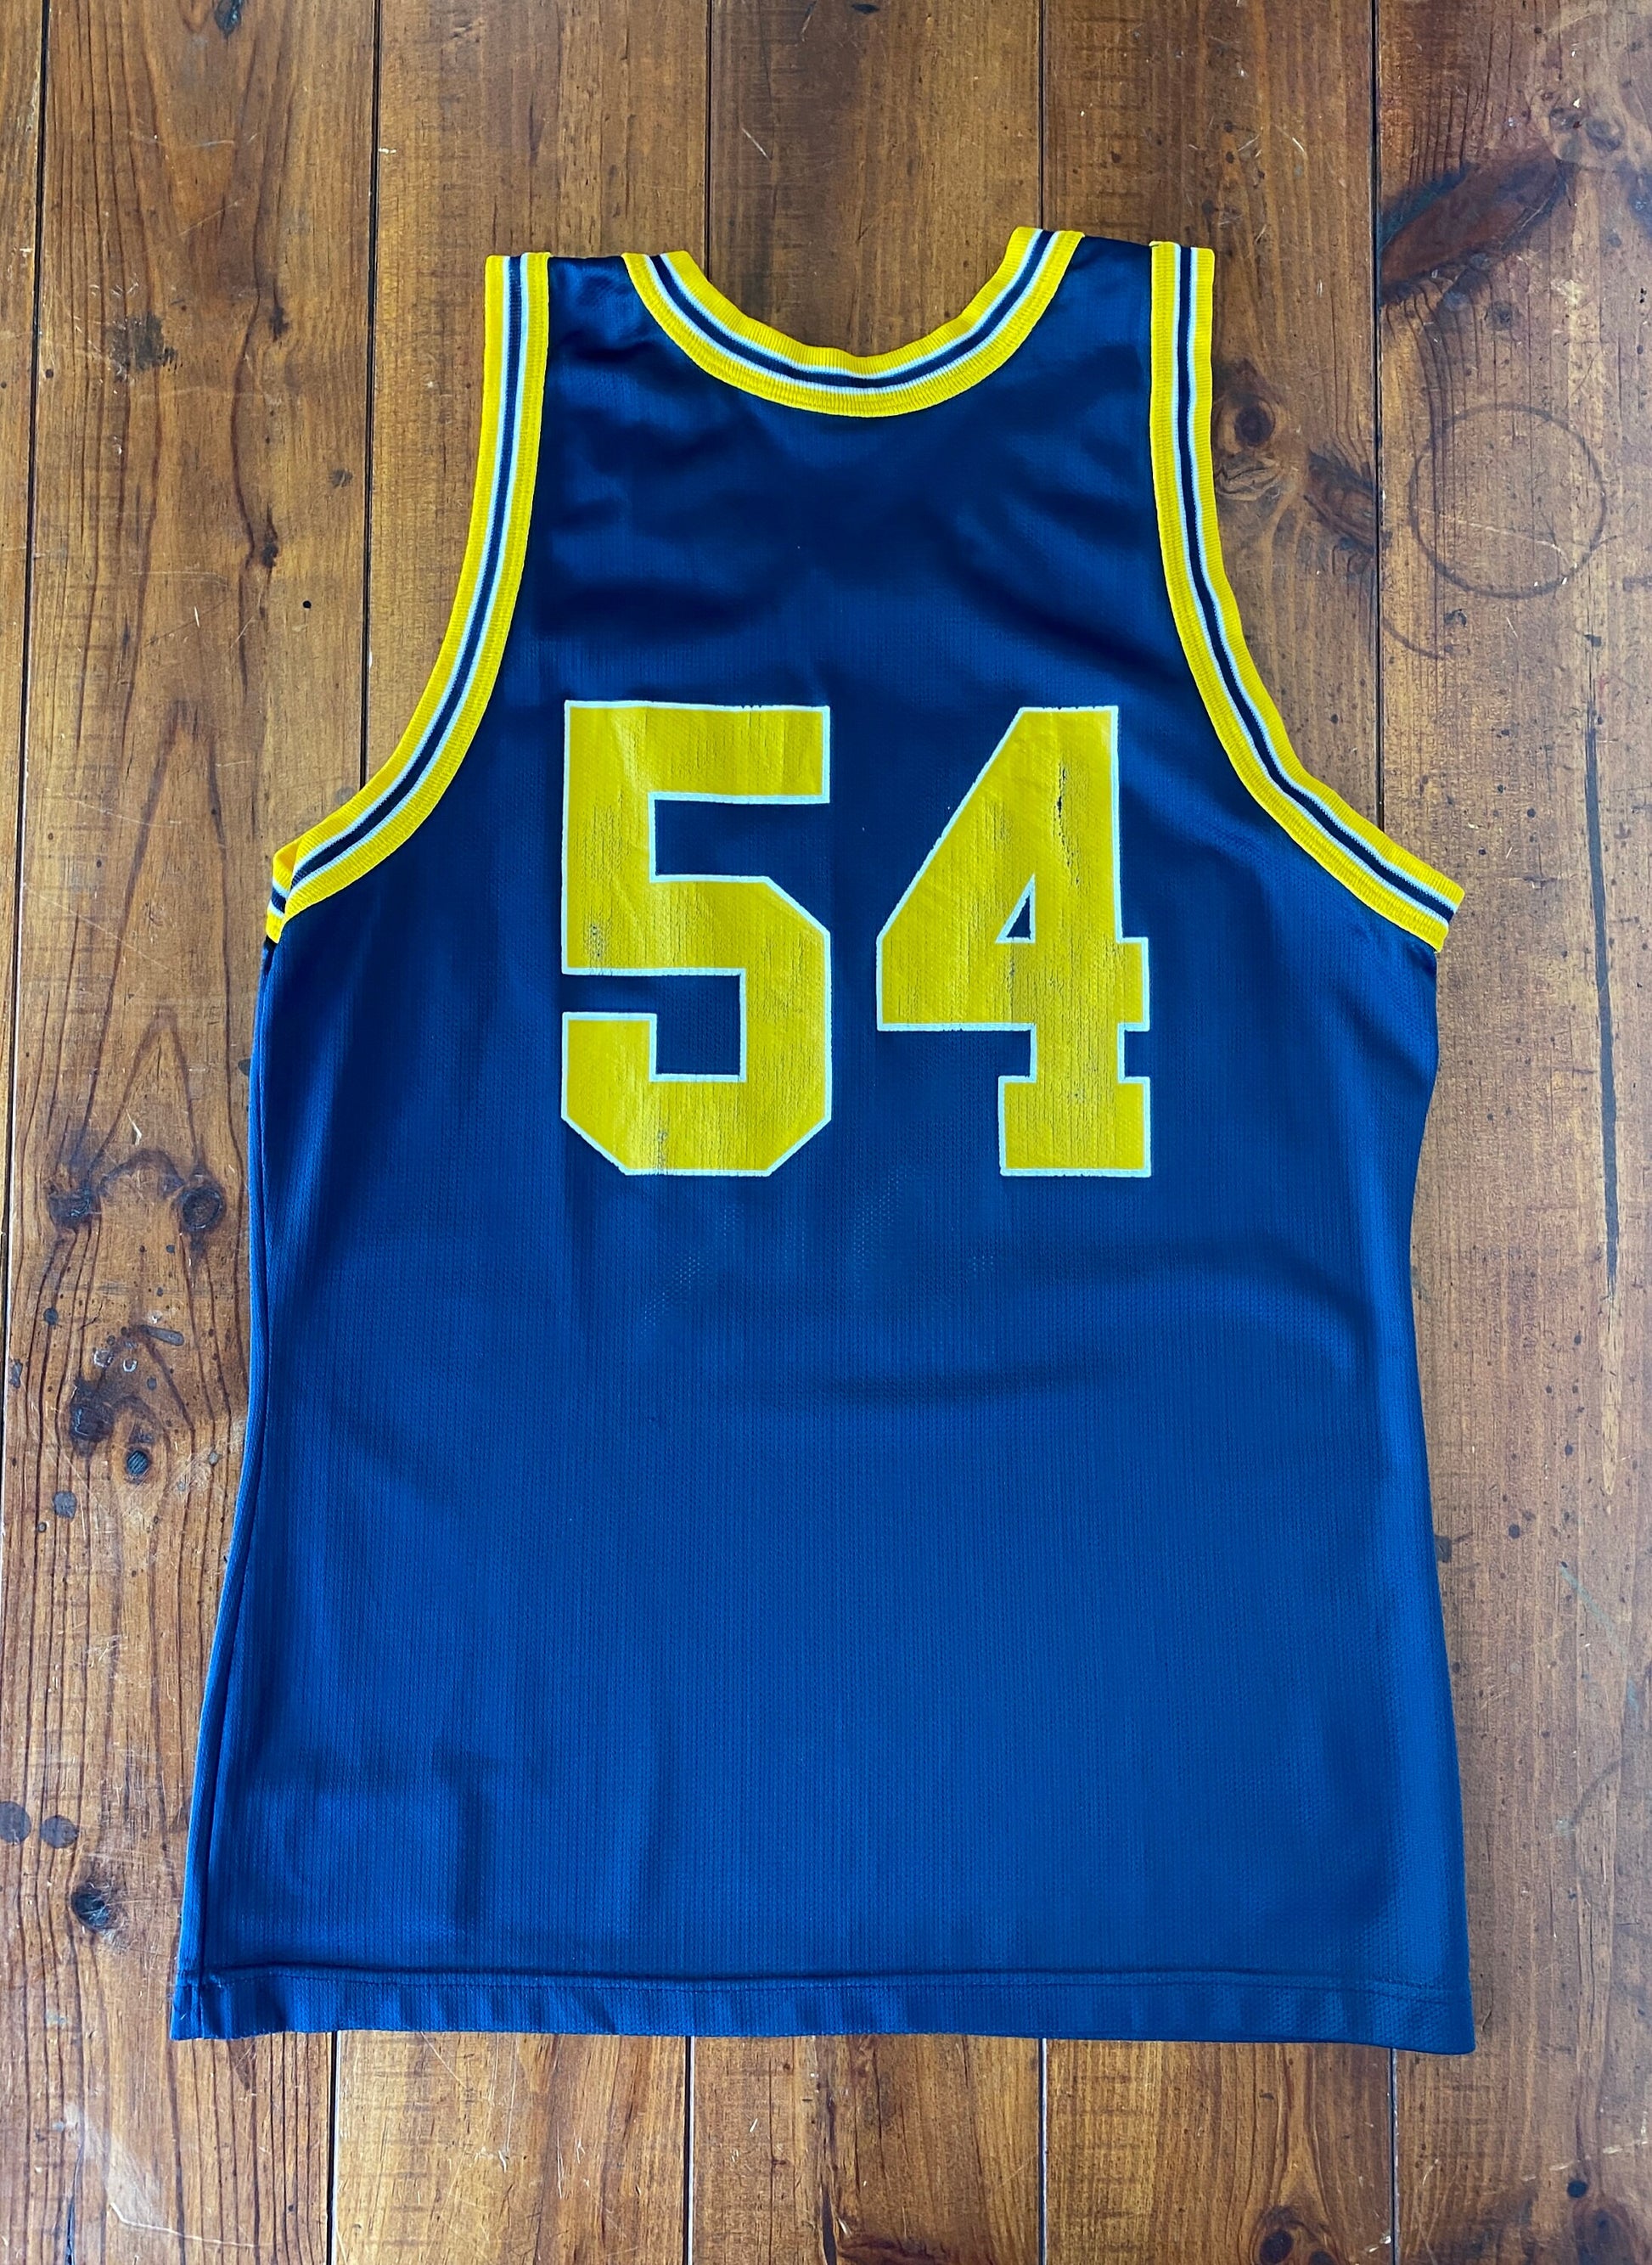 Authentic 90s Vintage NBA Jersey - #54 Michigan Wolverines - Size 40, Made in USA by Champion